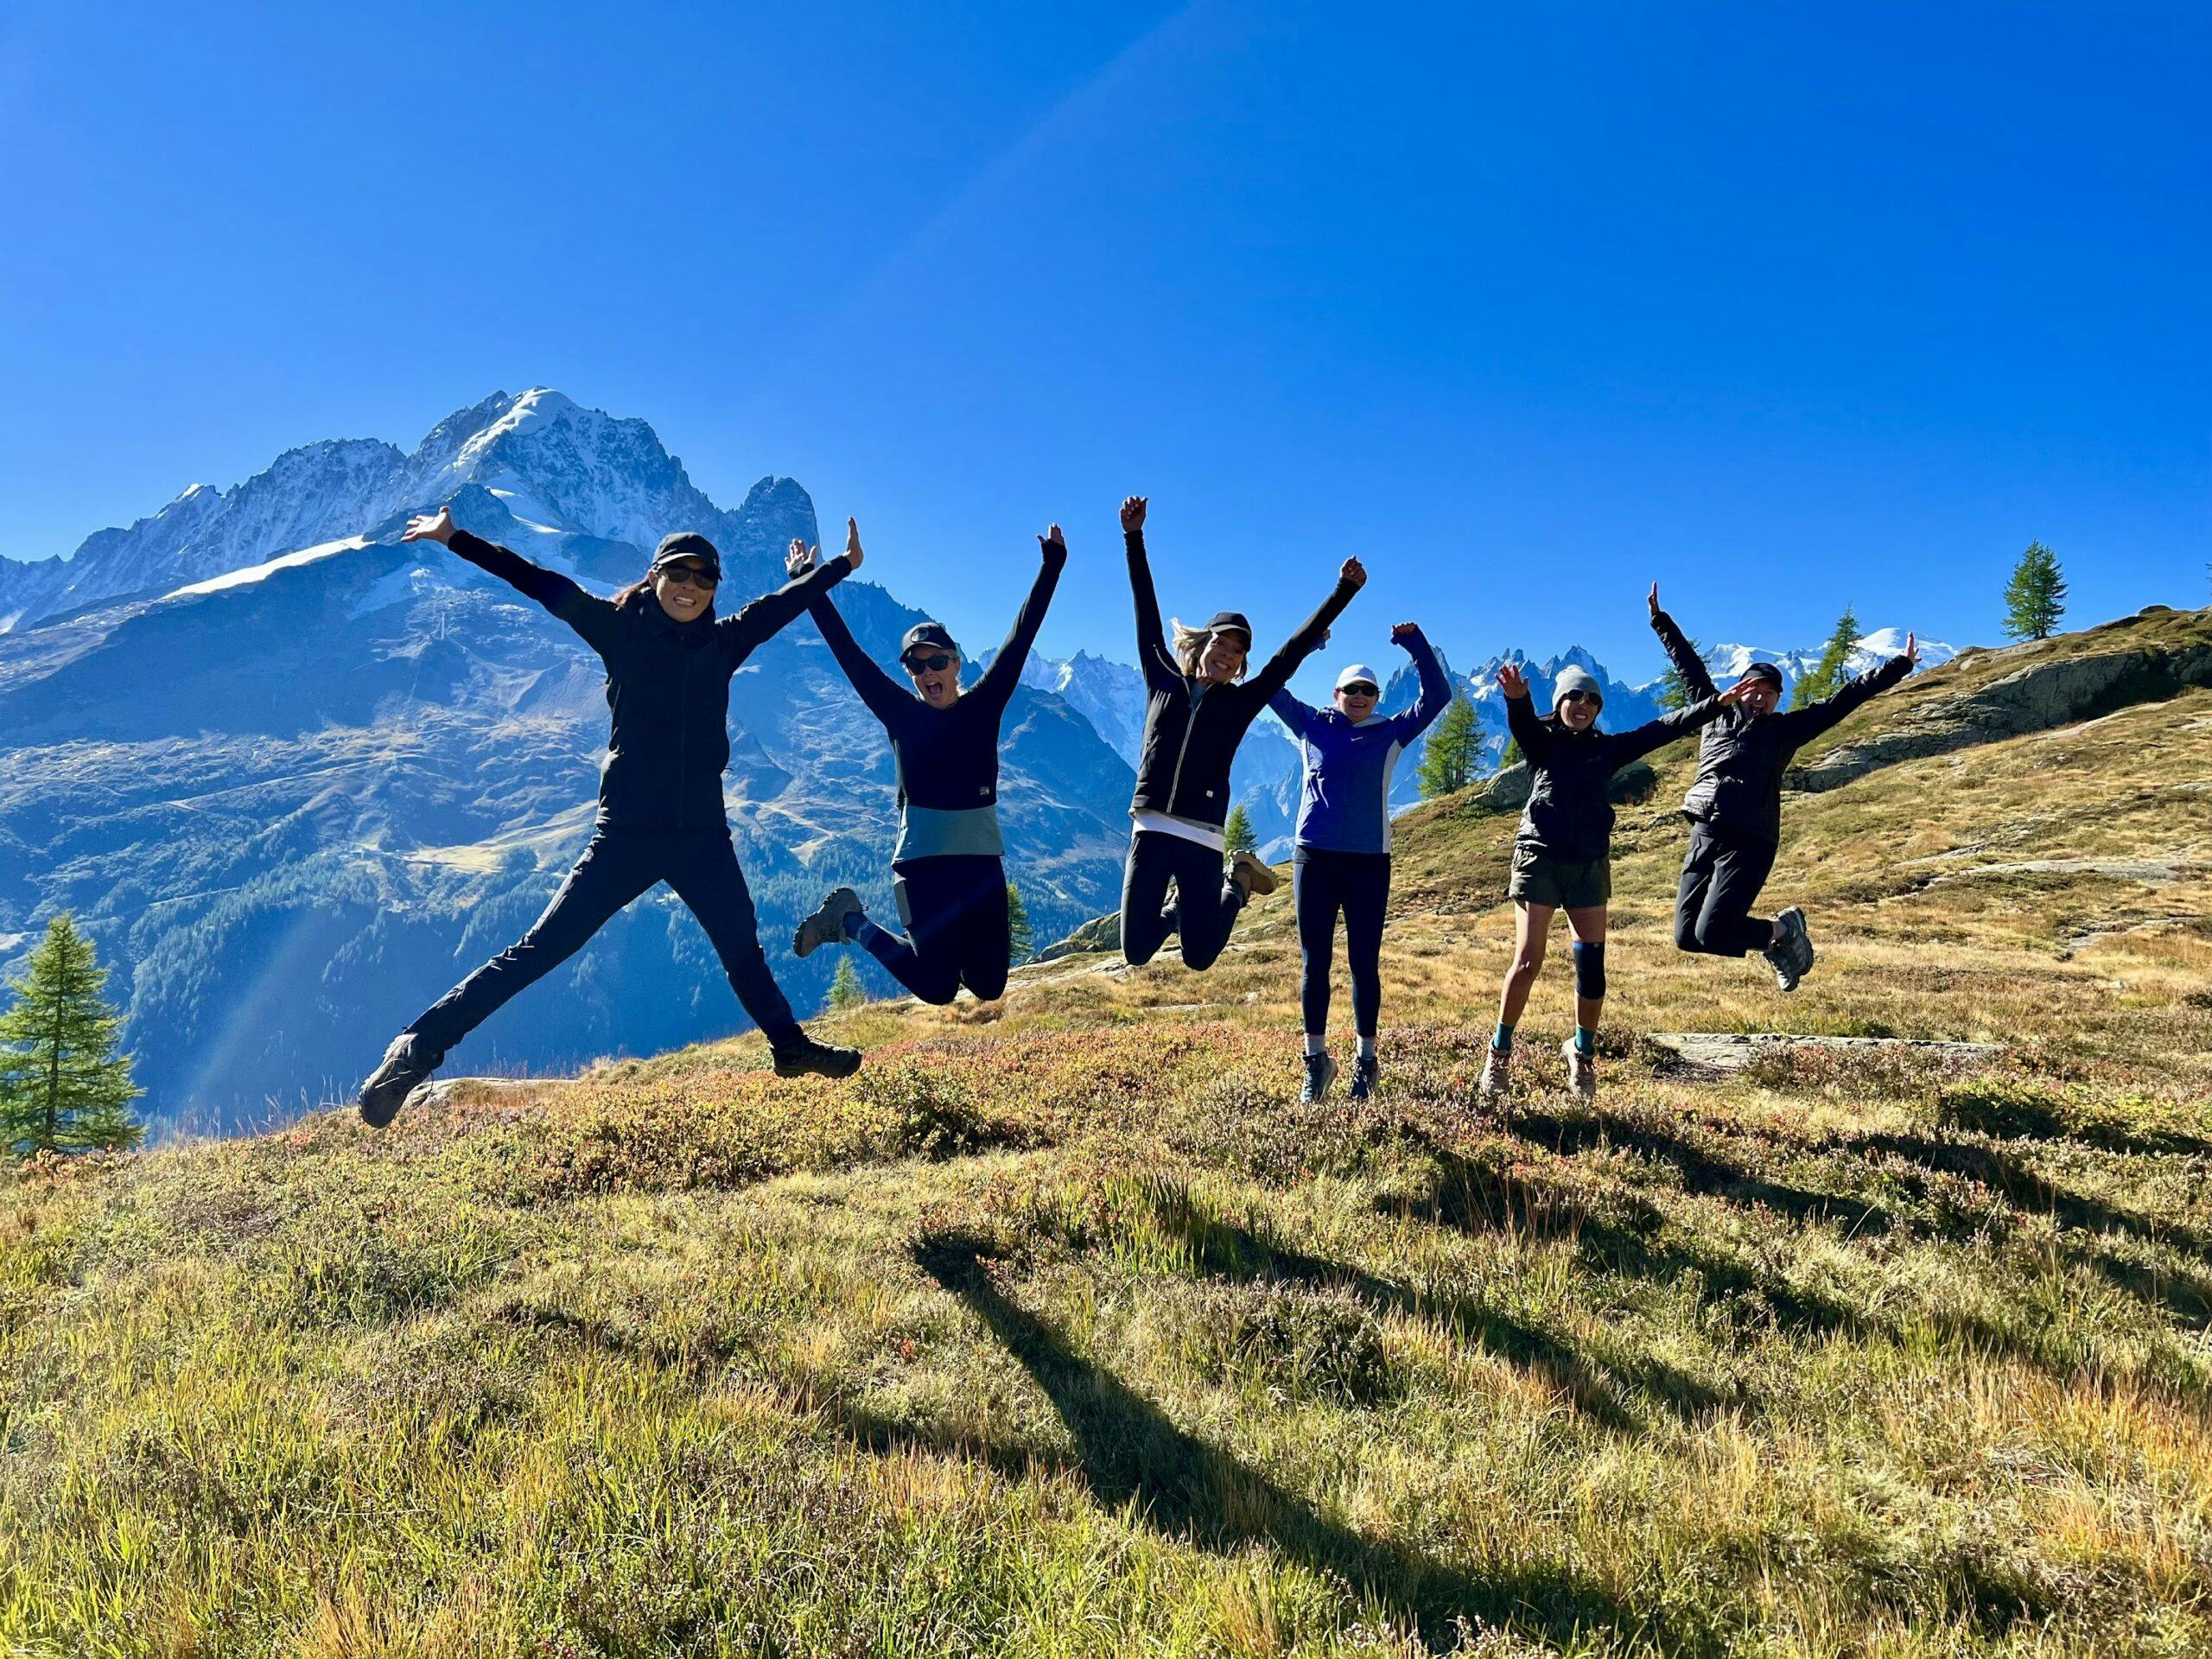 A group of people participating in a photo contest, joyfully jumping in the air against the backdrop of a majestic mountain.